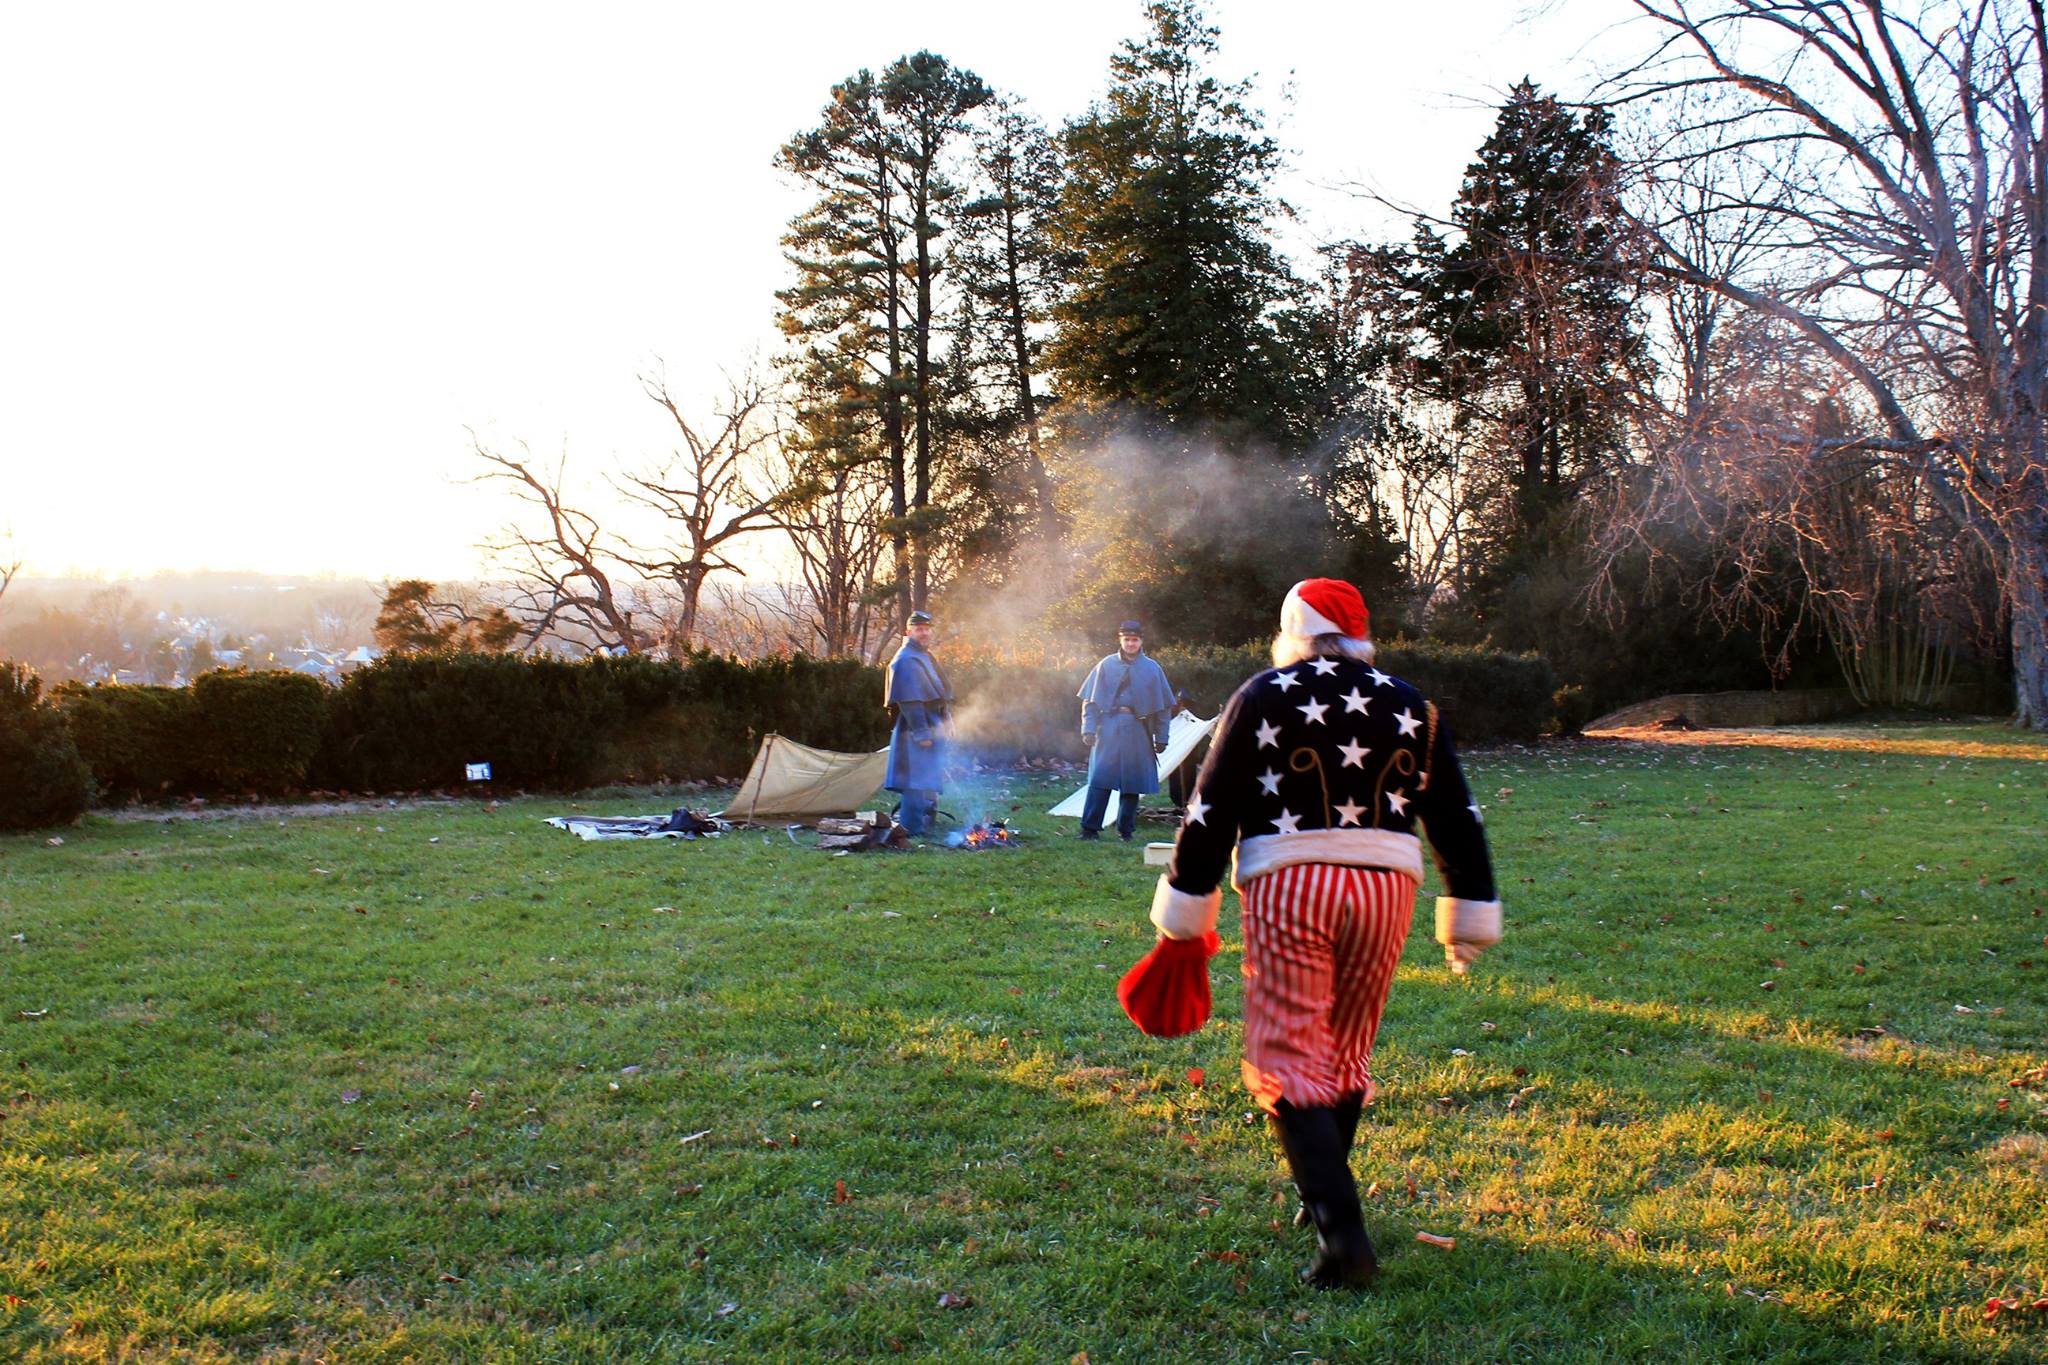 Santa in red, white and blue Civil War era costume walks toward Union soldiers at campfire.